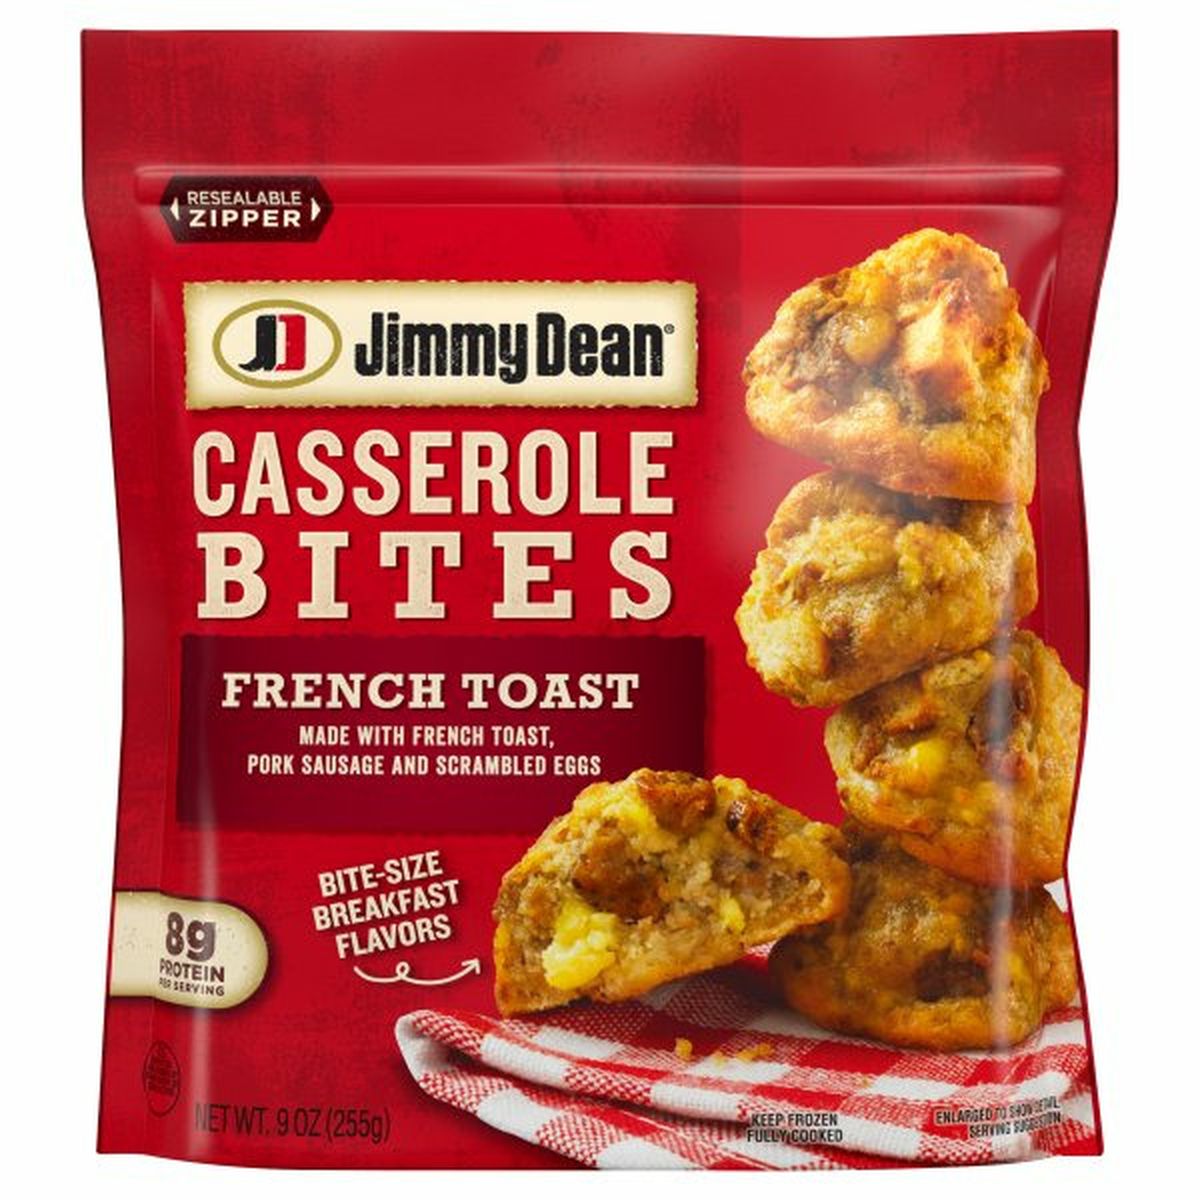 Calories in Jimmy Dean French Toast Casserole Bites, 9 oz